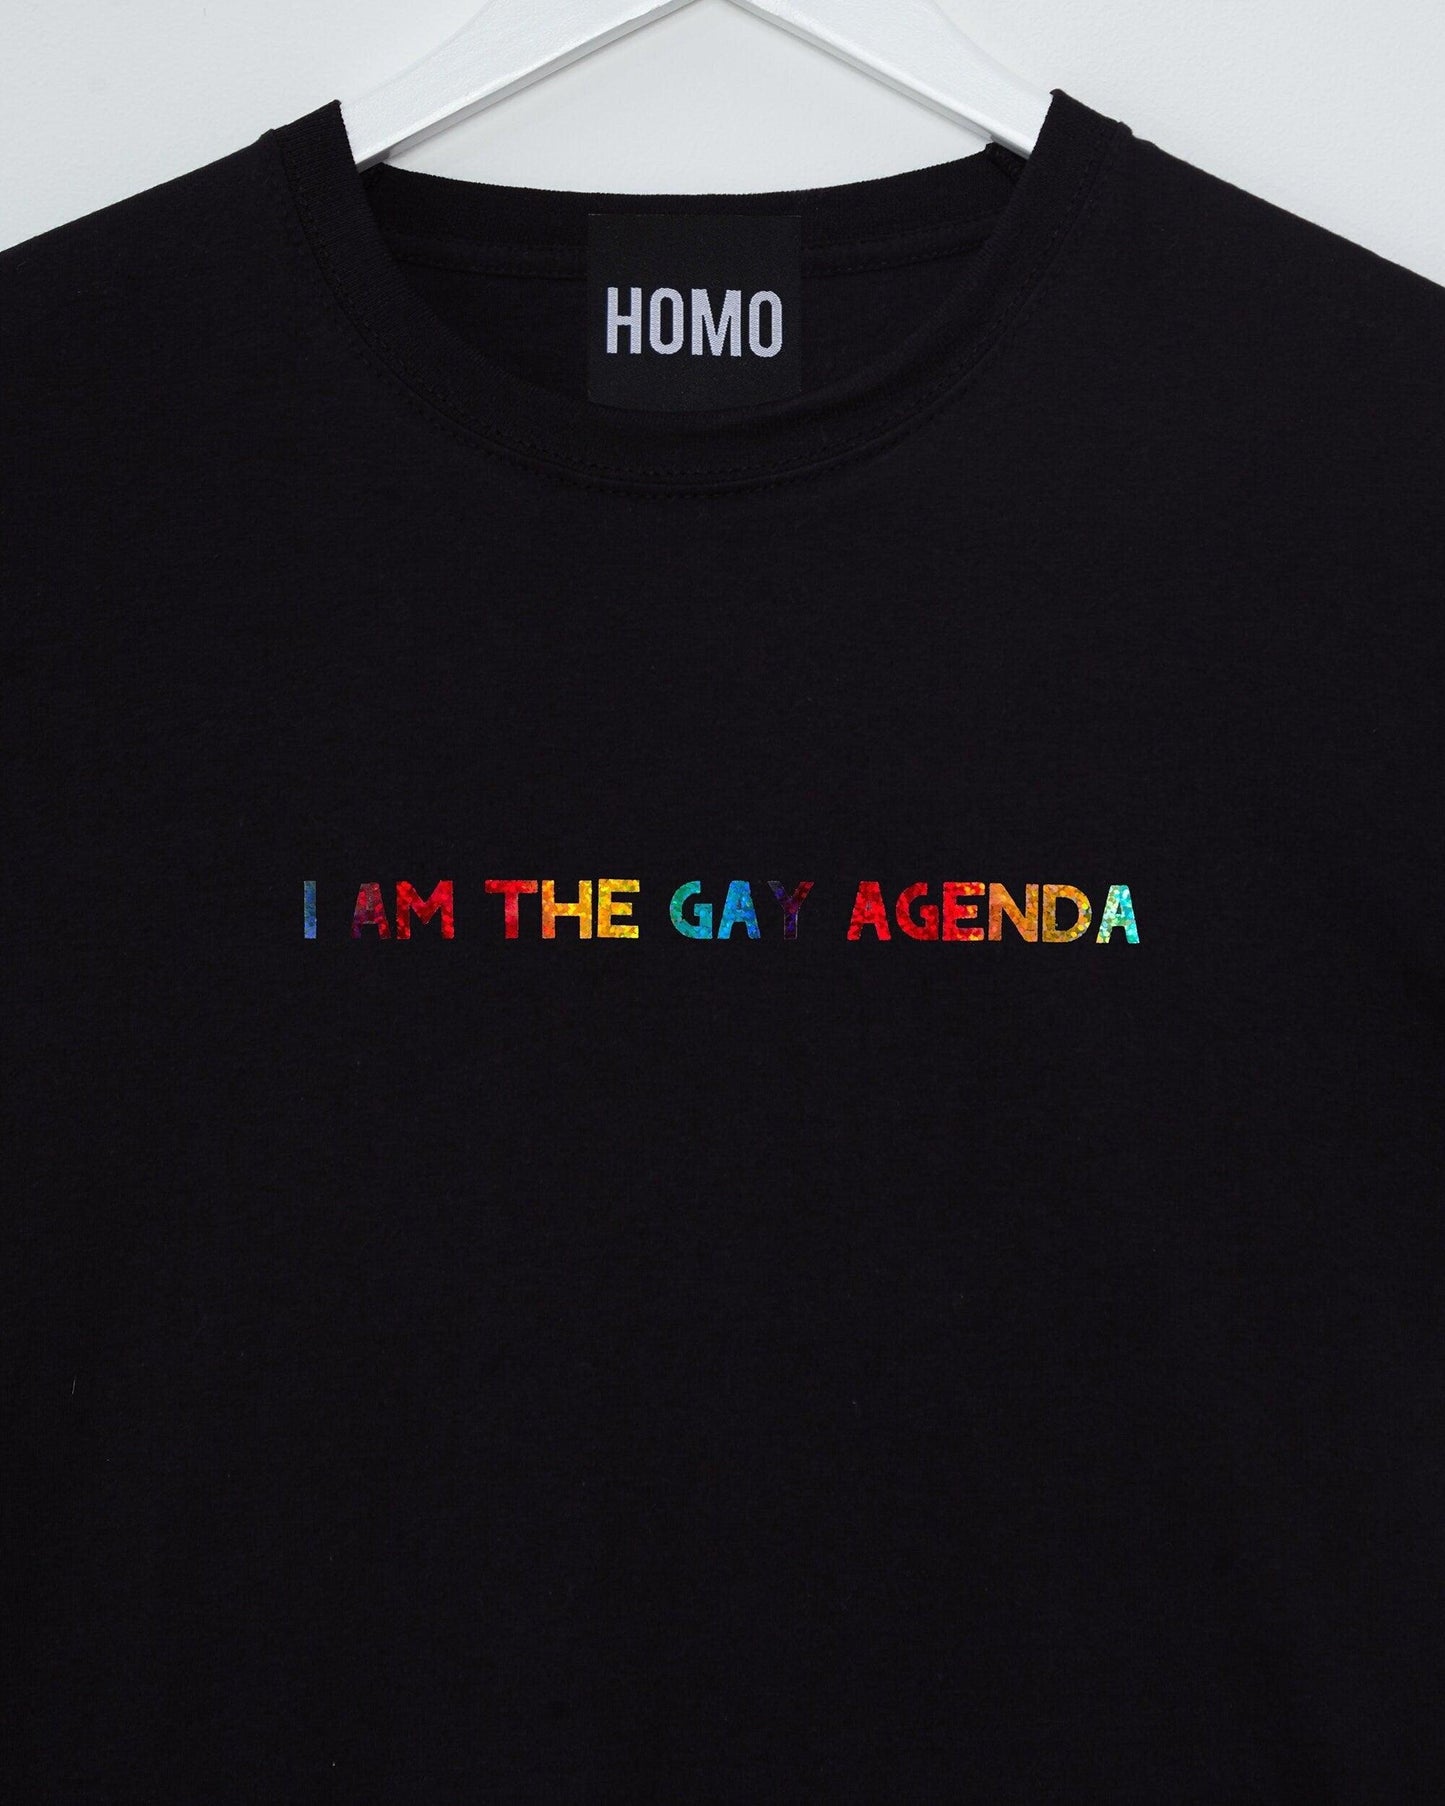 As seen on Married at first sight, I Am The Gay Agenda Tee - Sparkly Rainbow on Black